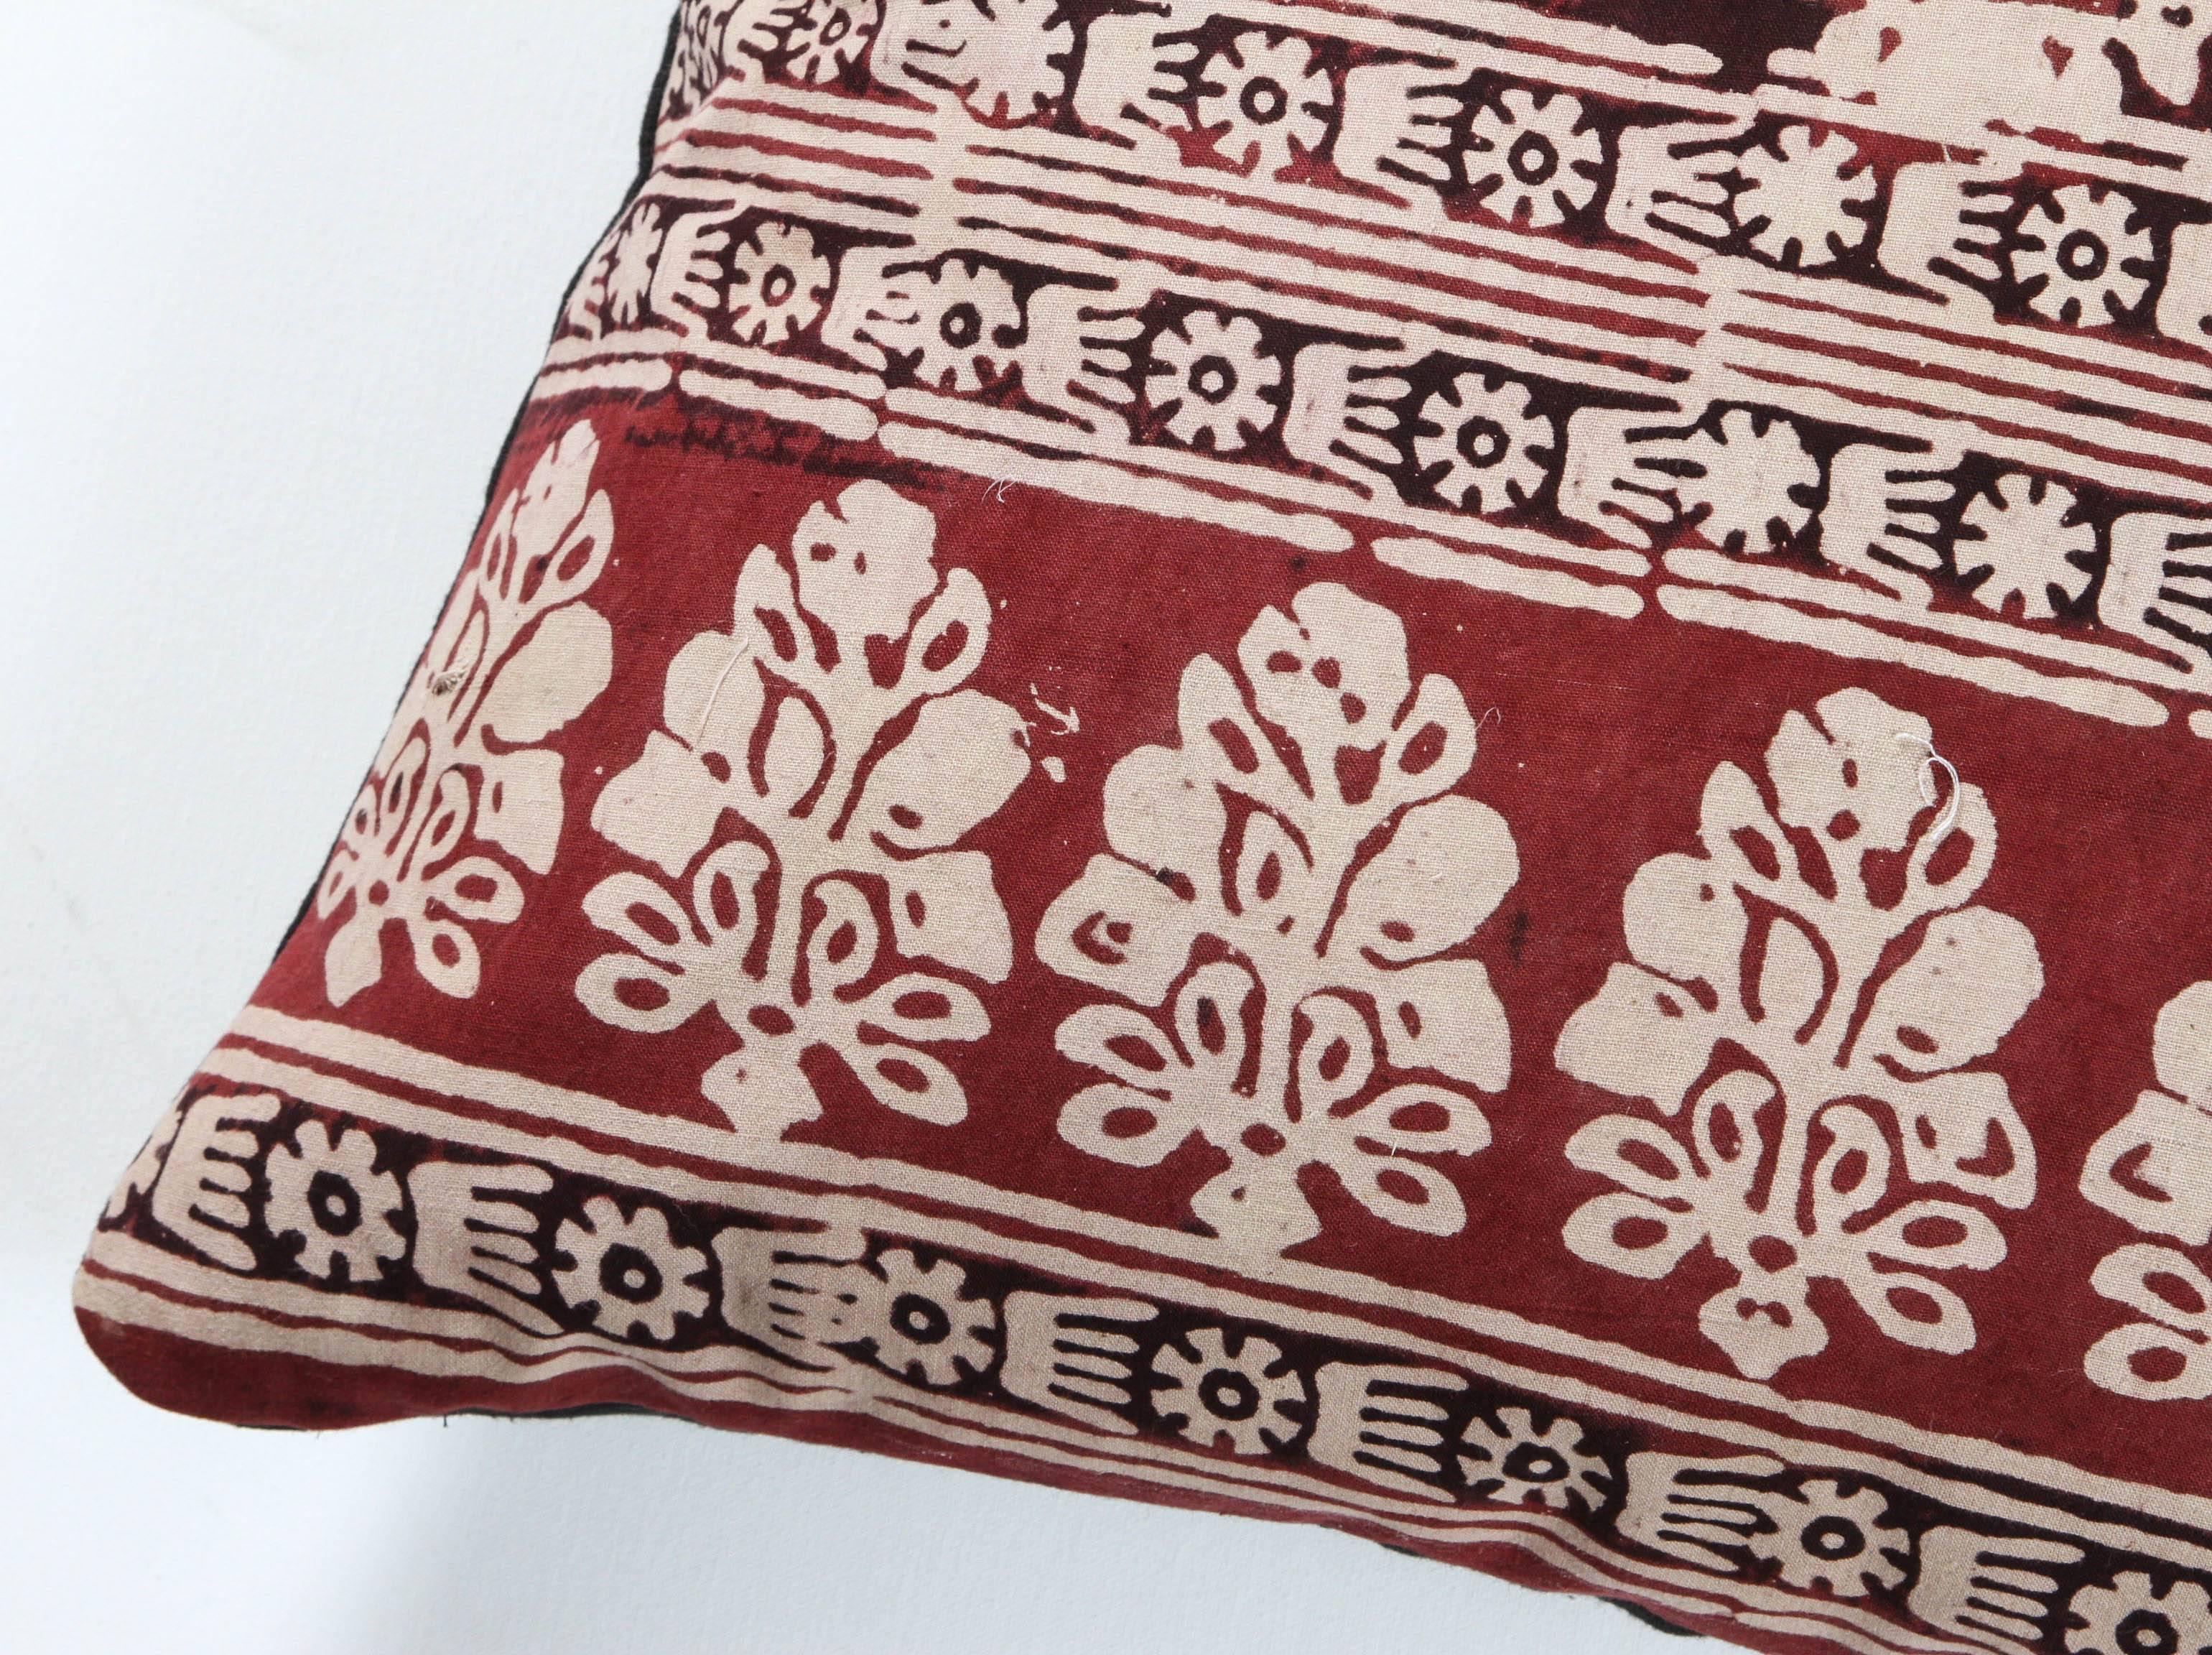 Vintage Indian Resist Dyed Print Pillow in Red, Brown and Off-White In Excellent Condition For Sale In Los Angeles, CA